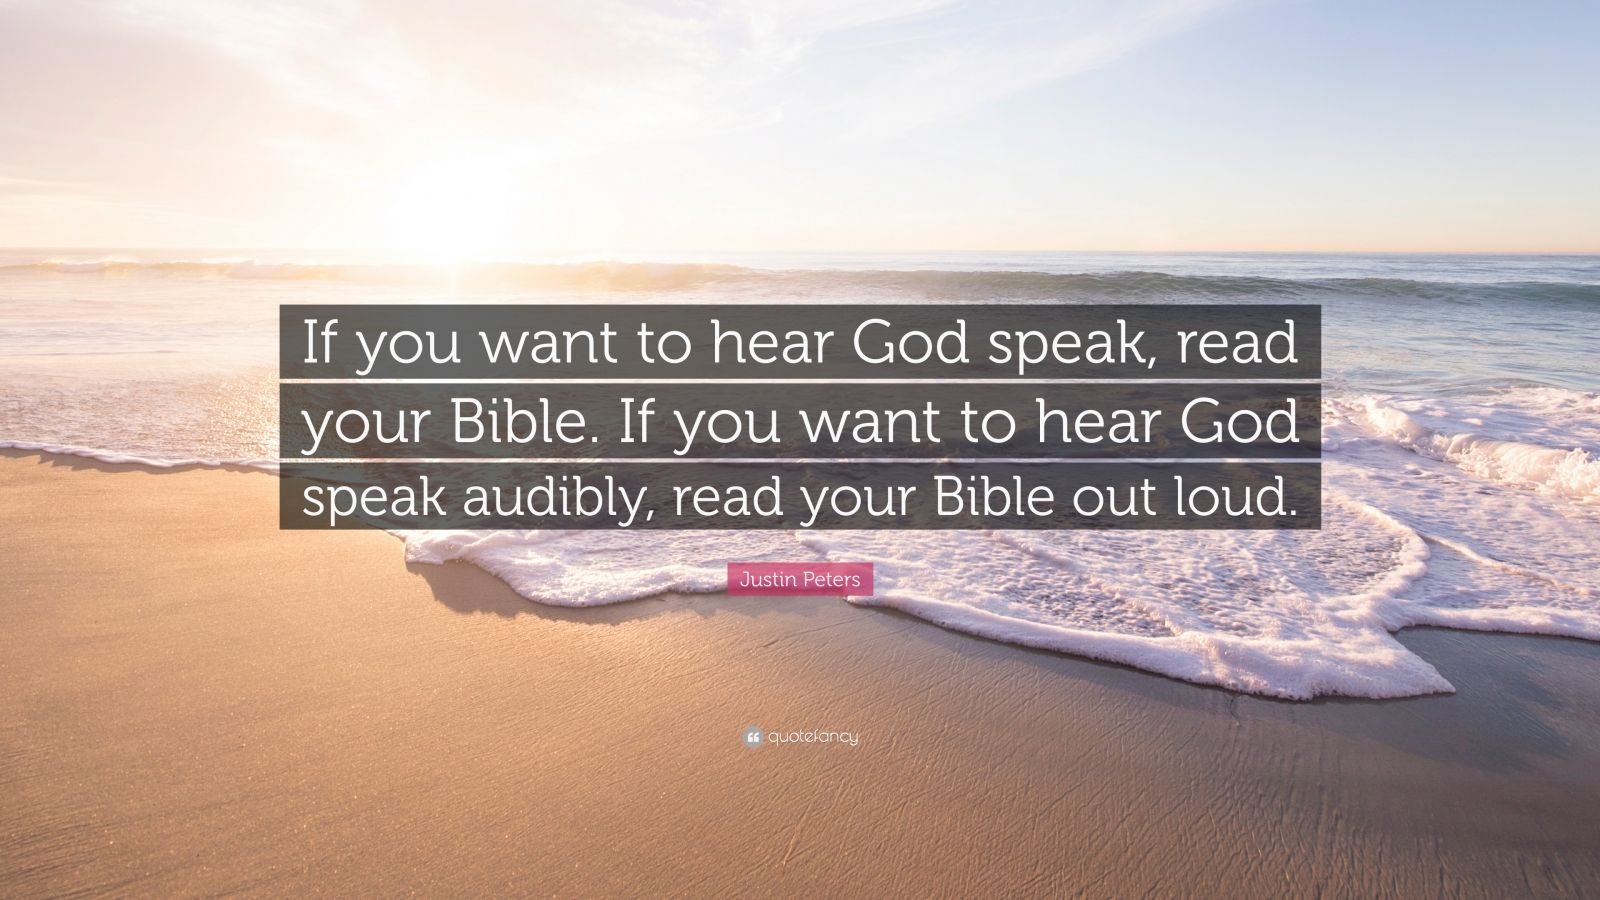 Justin Peters Quote: “If you want to hear God speak, read your Bible. If  you want to hear God speak audibly, read your Bible out loud.”